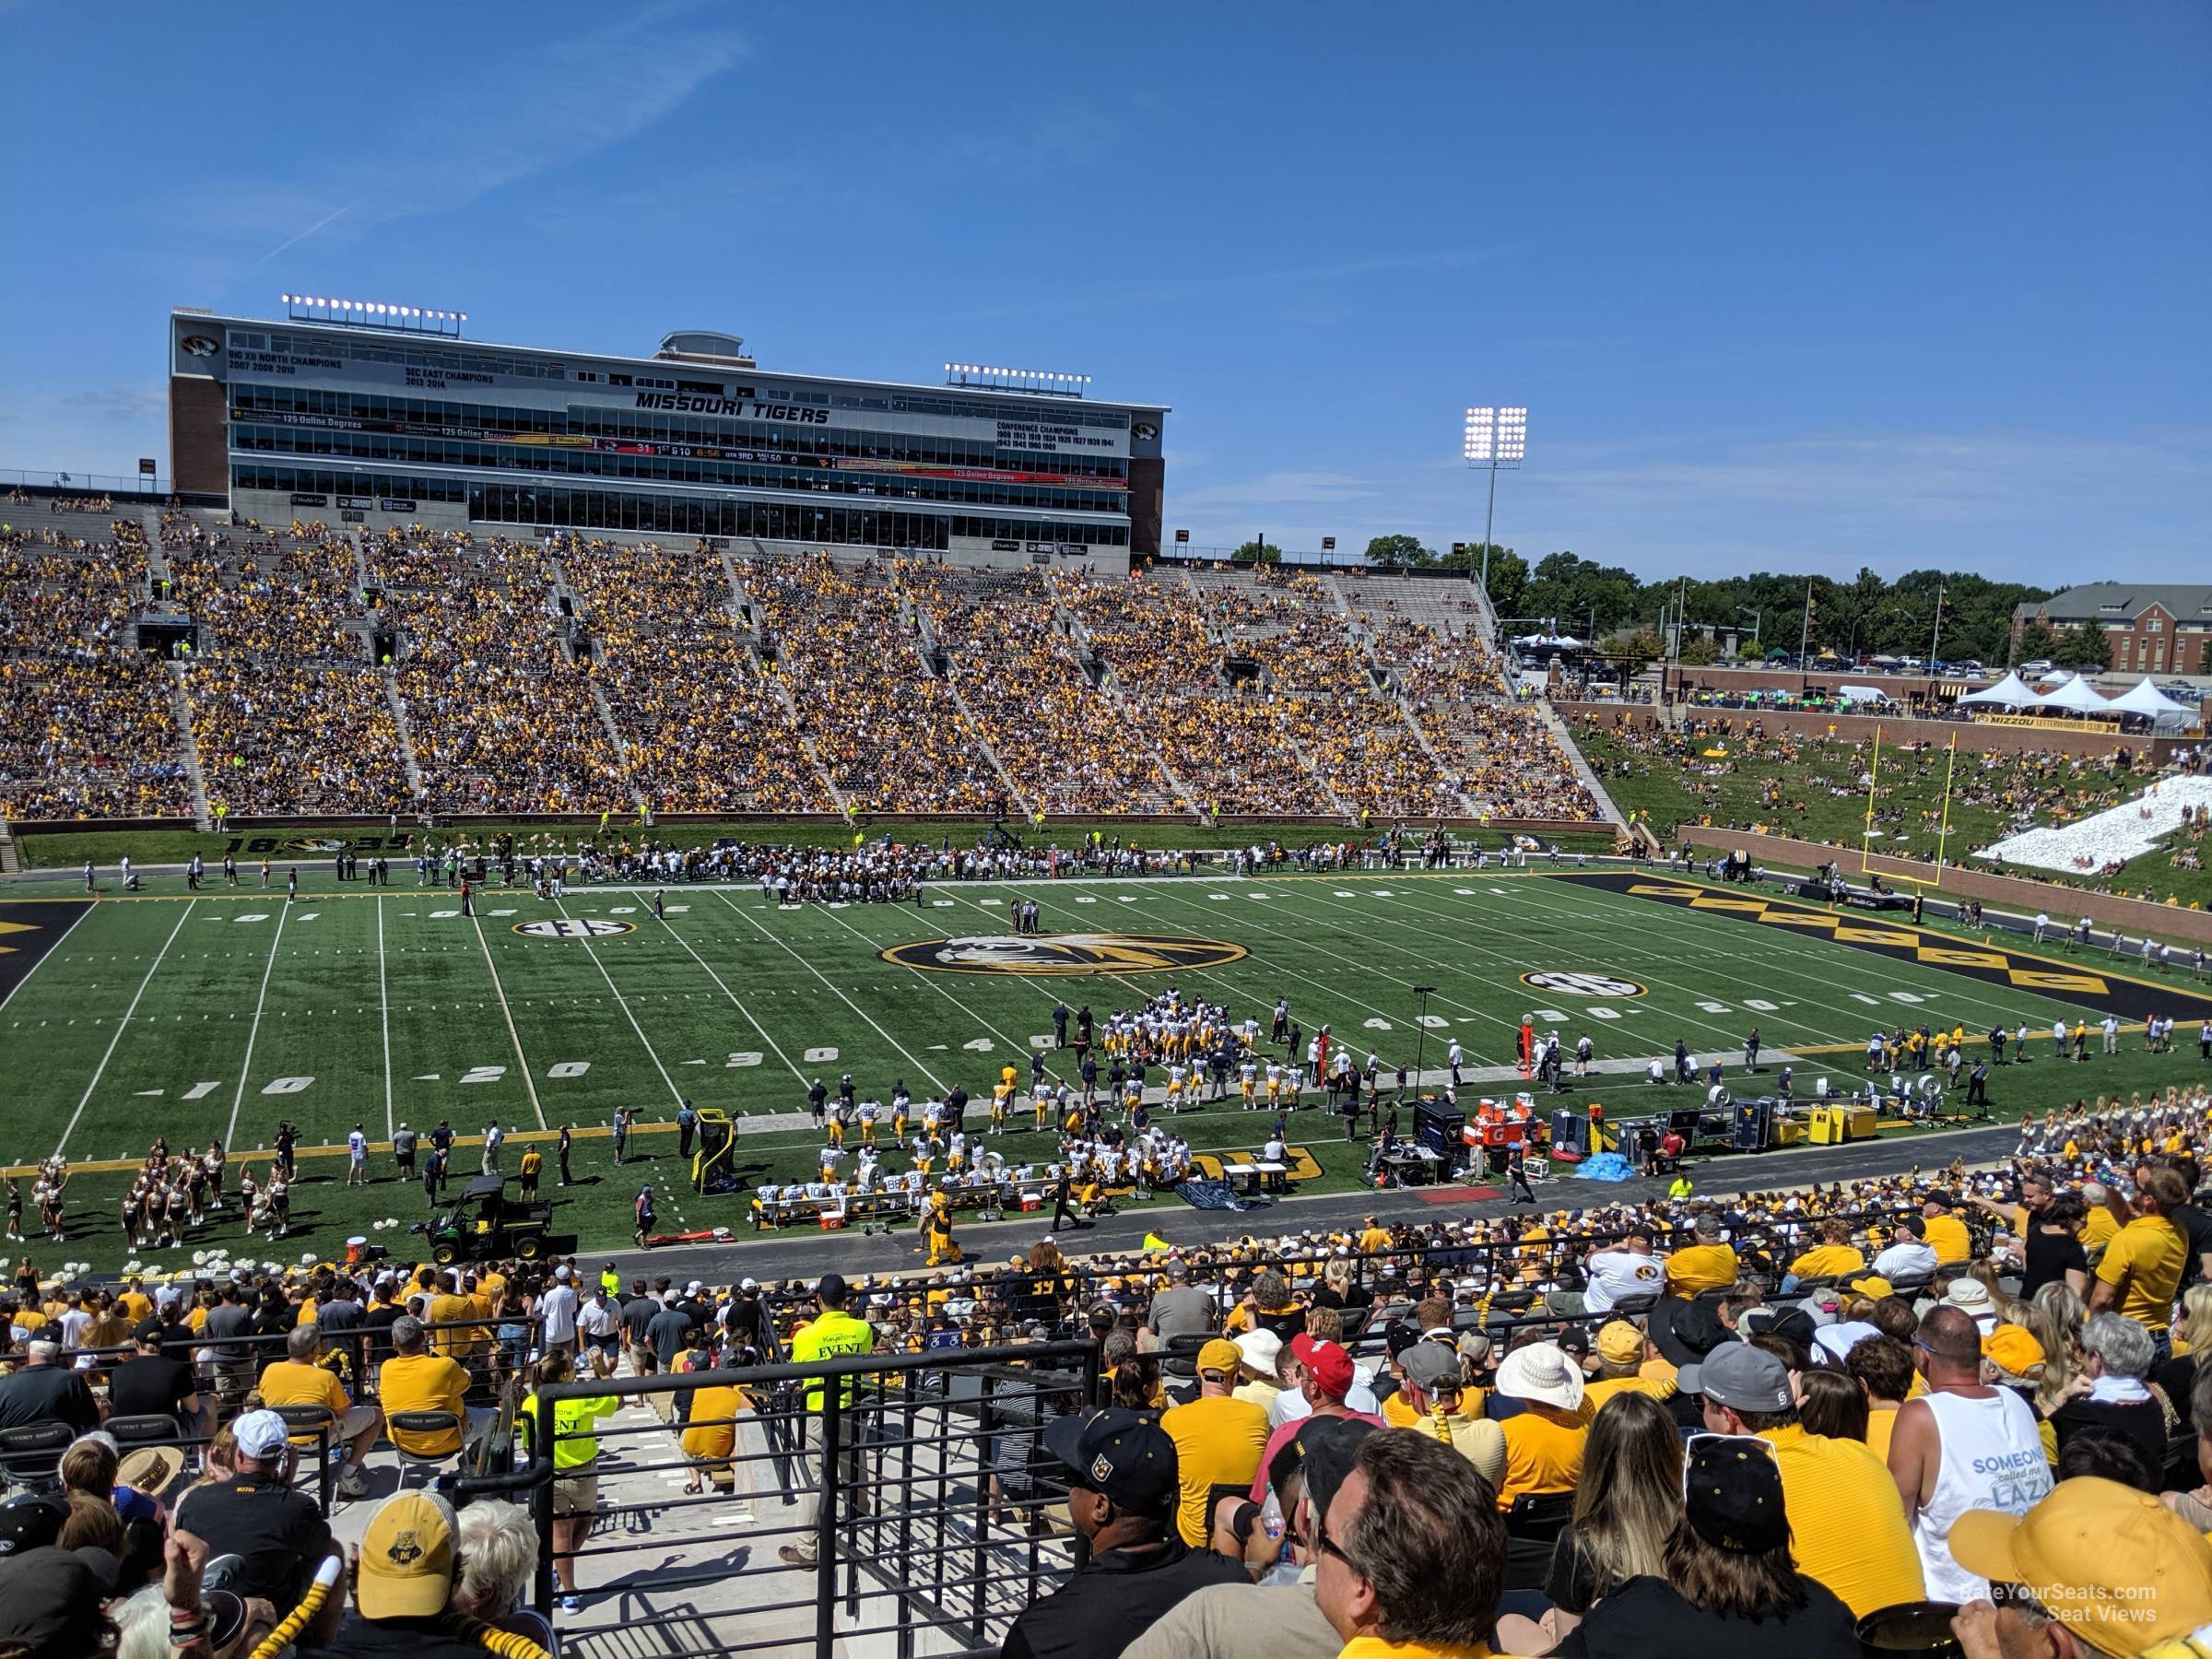 section 103, row 54 seat view  - faurot field